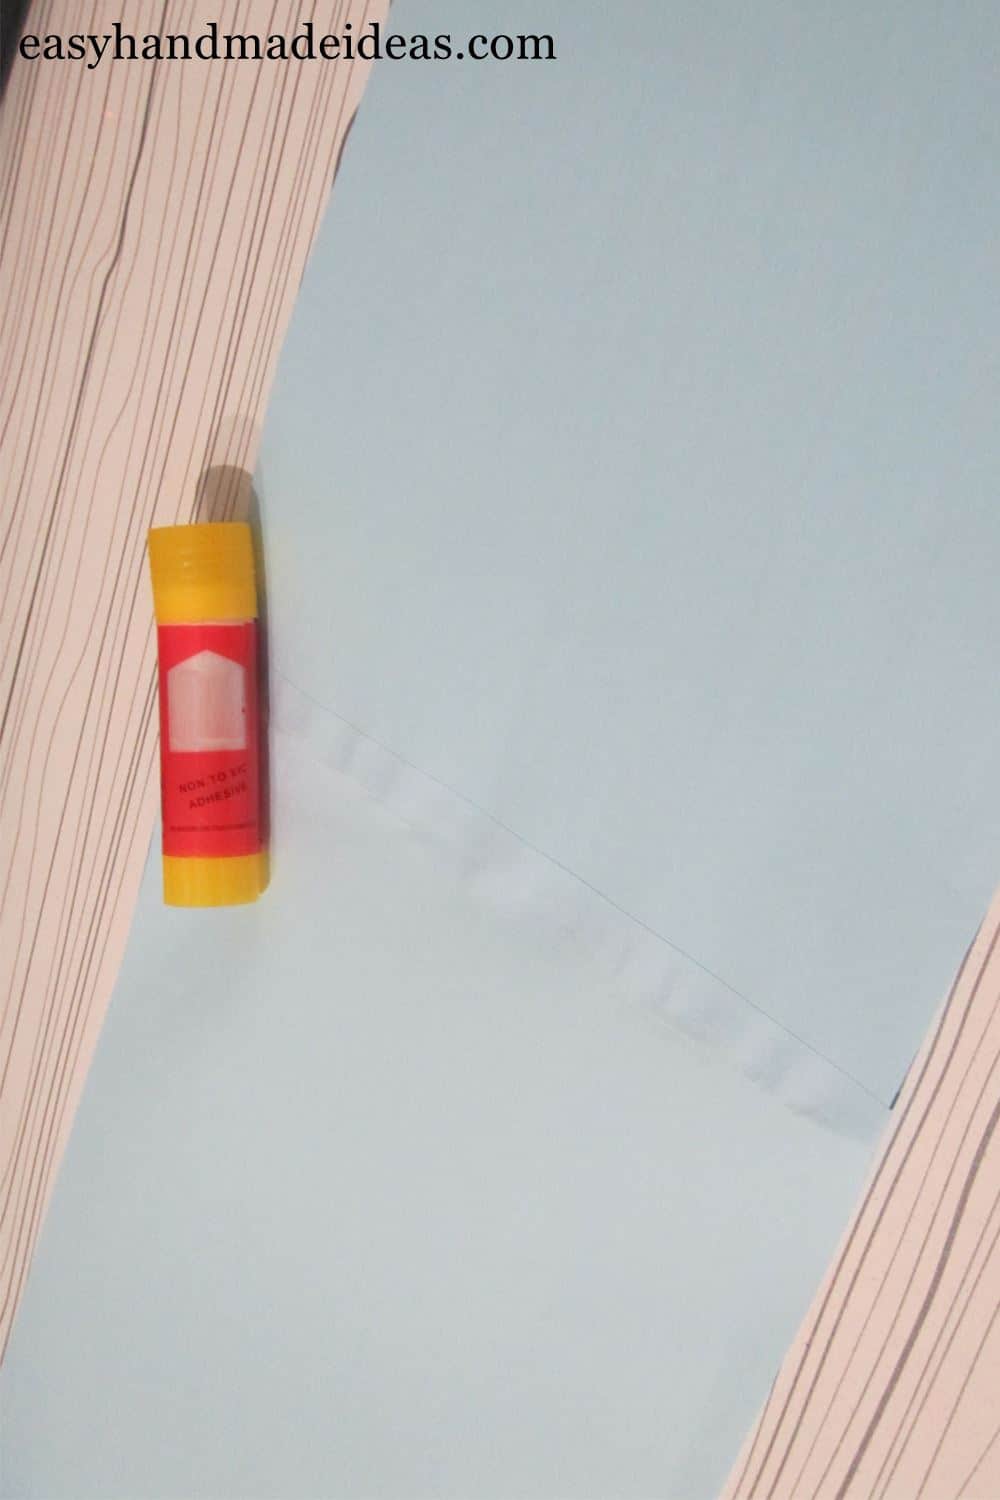 Glue two sheets